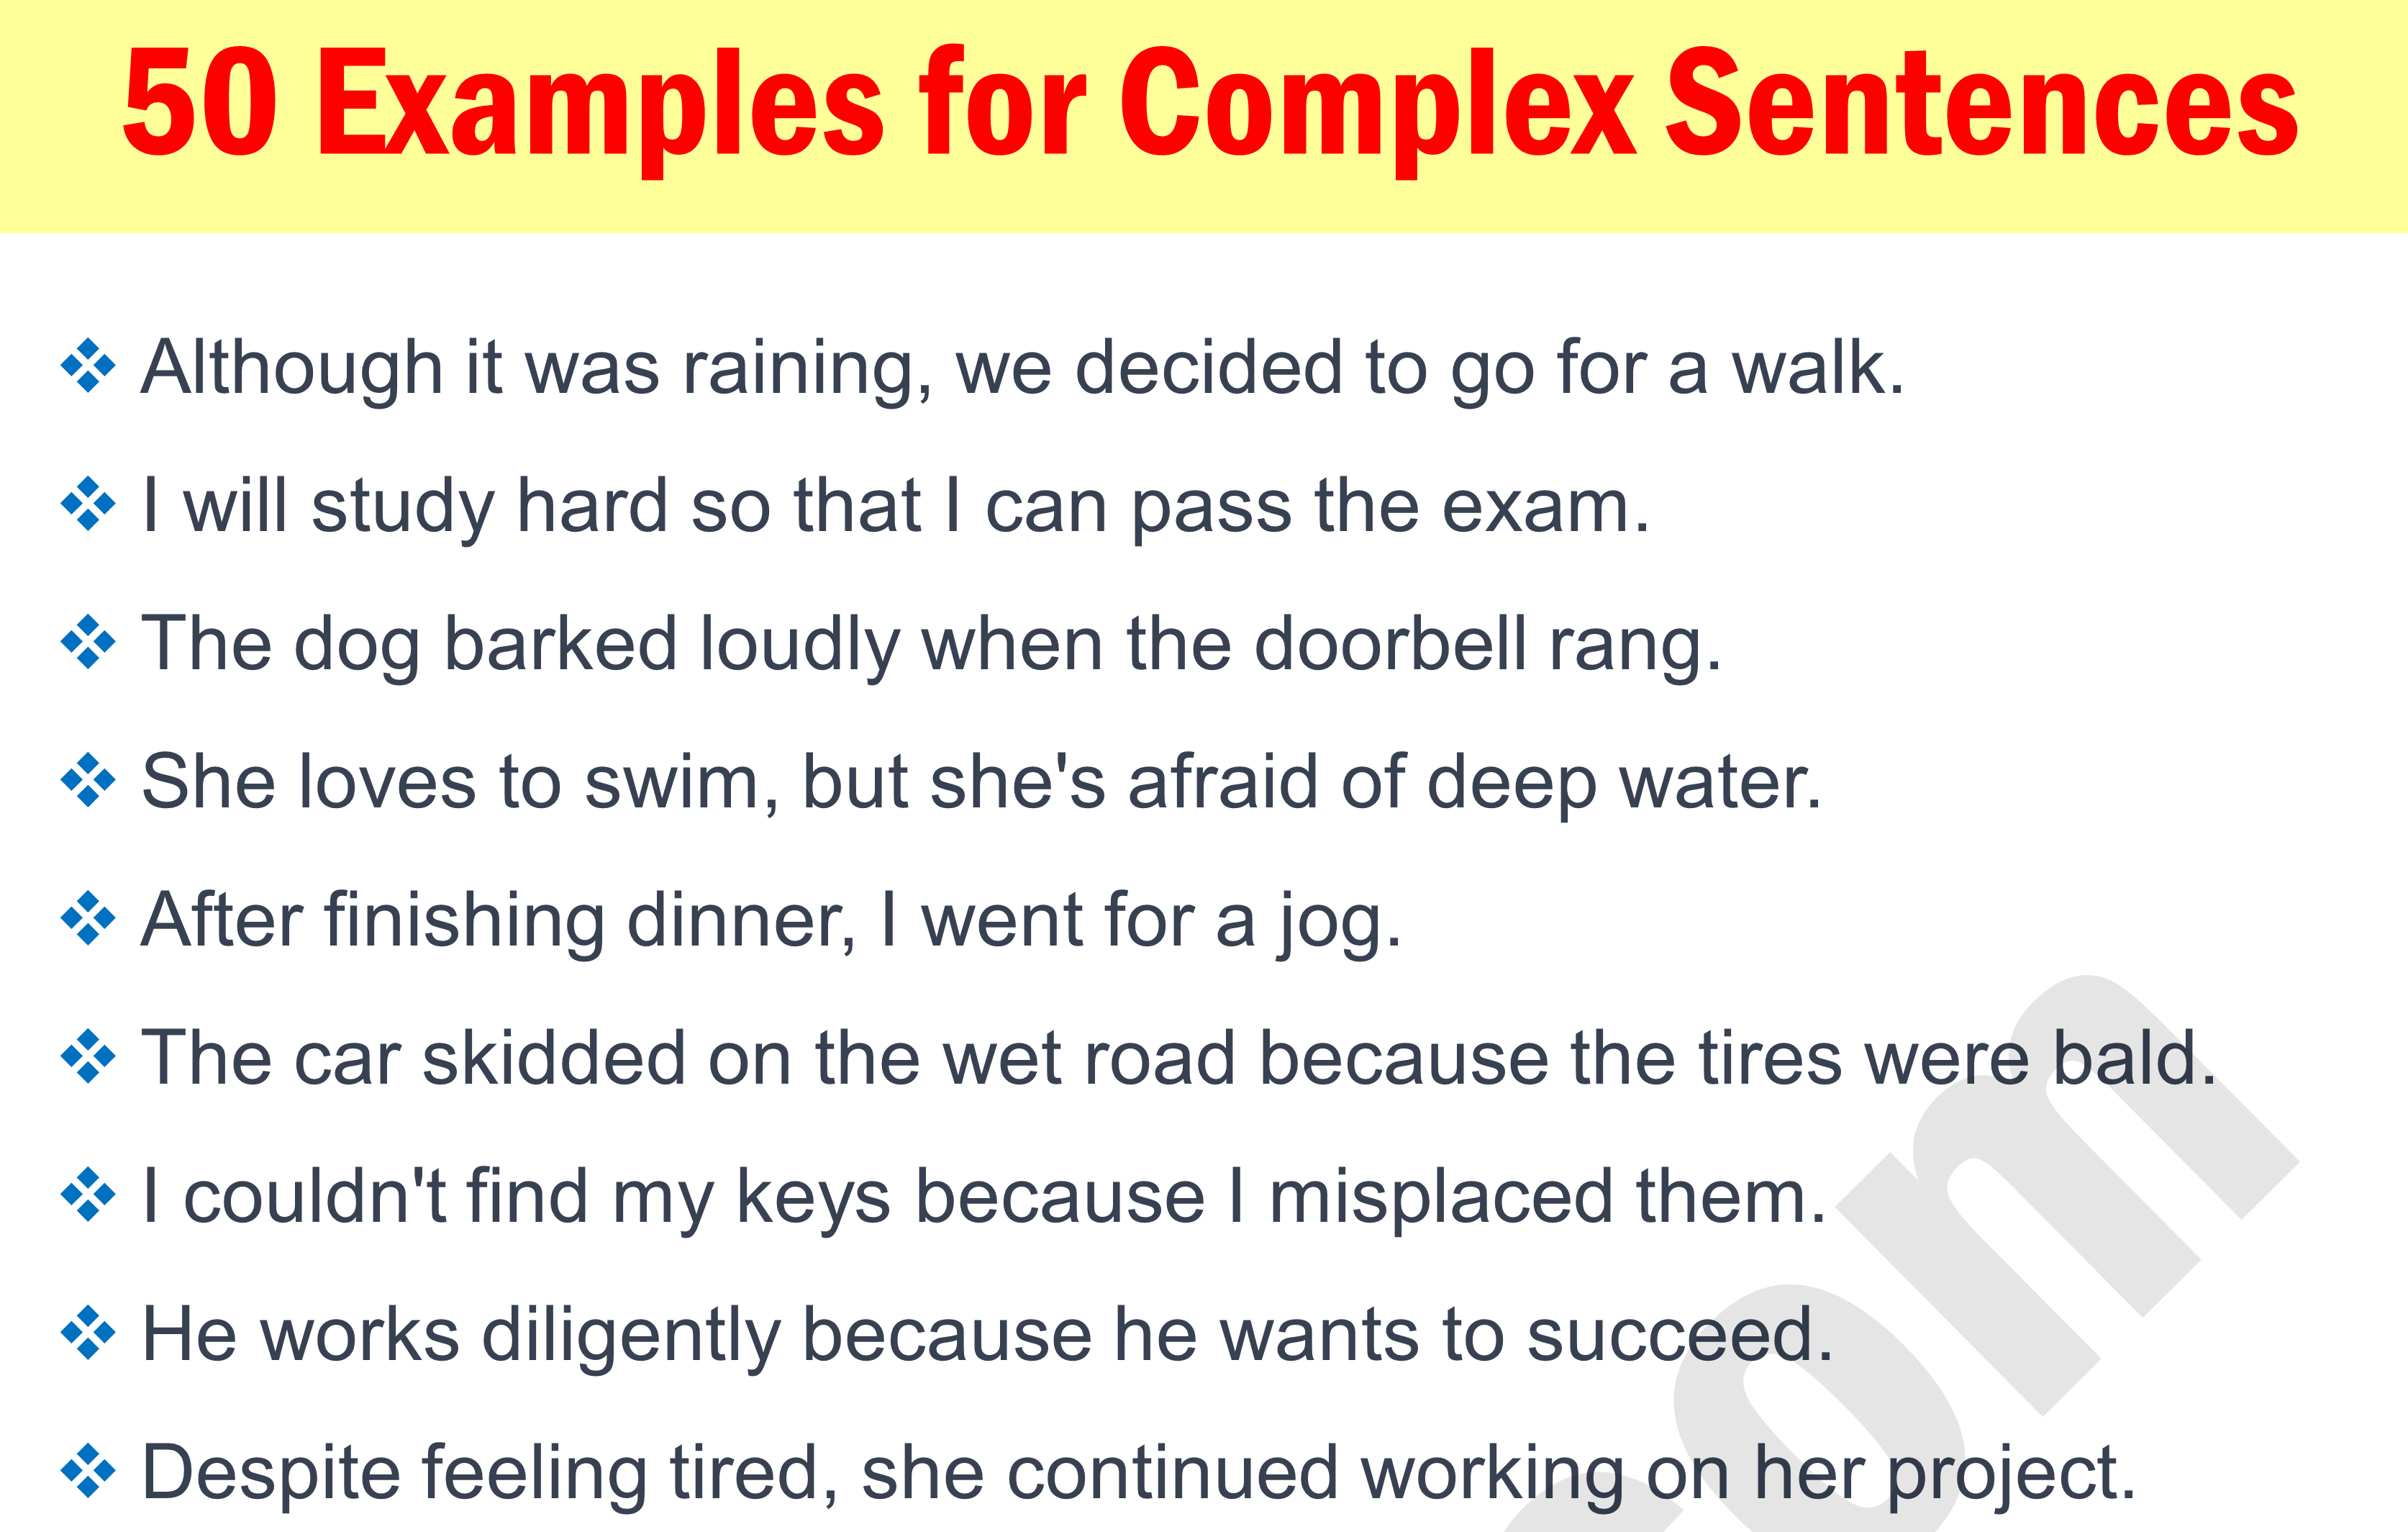 50 Complex Sentences Examples in English